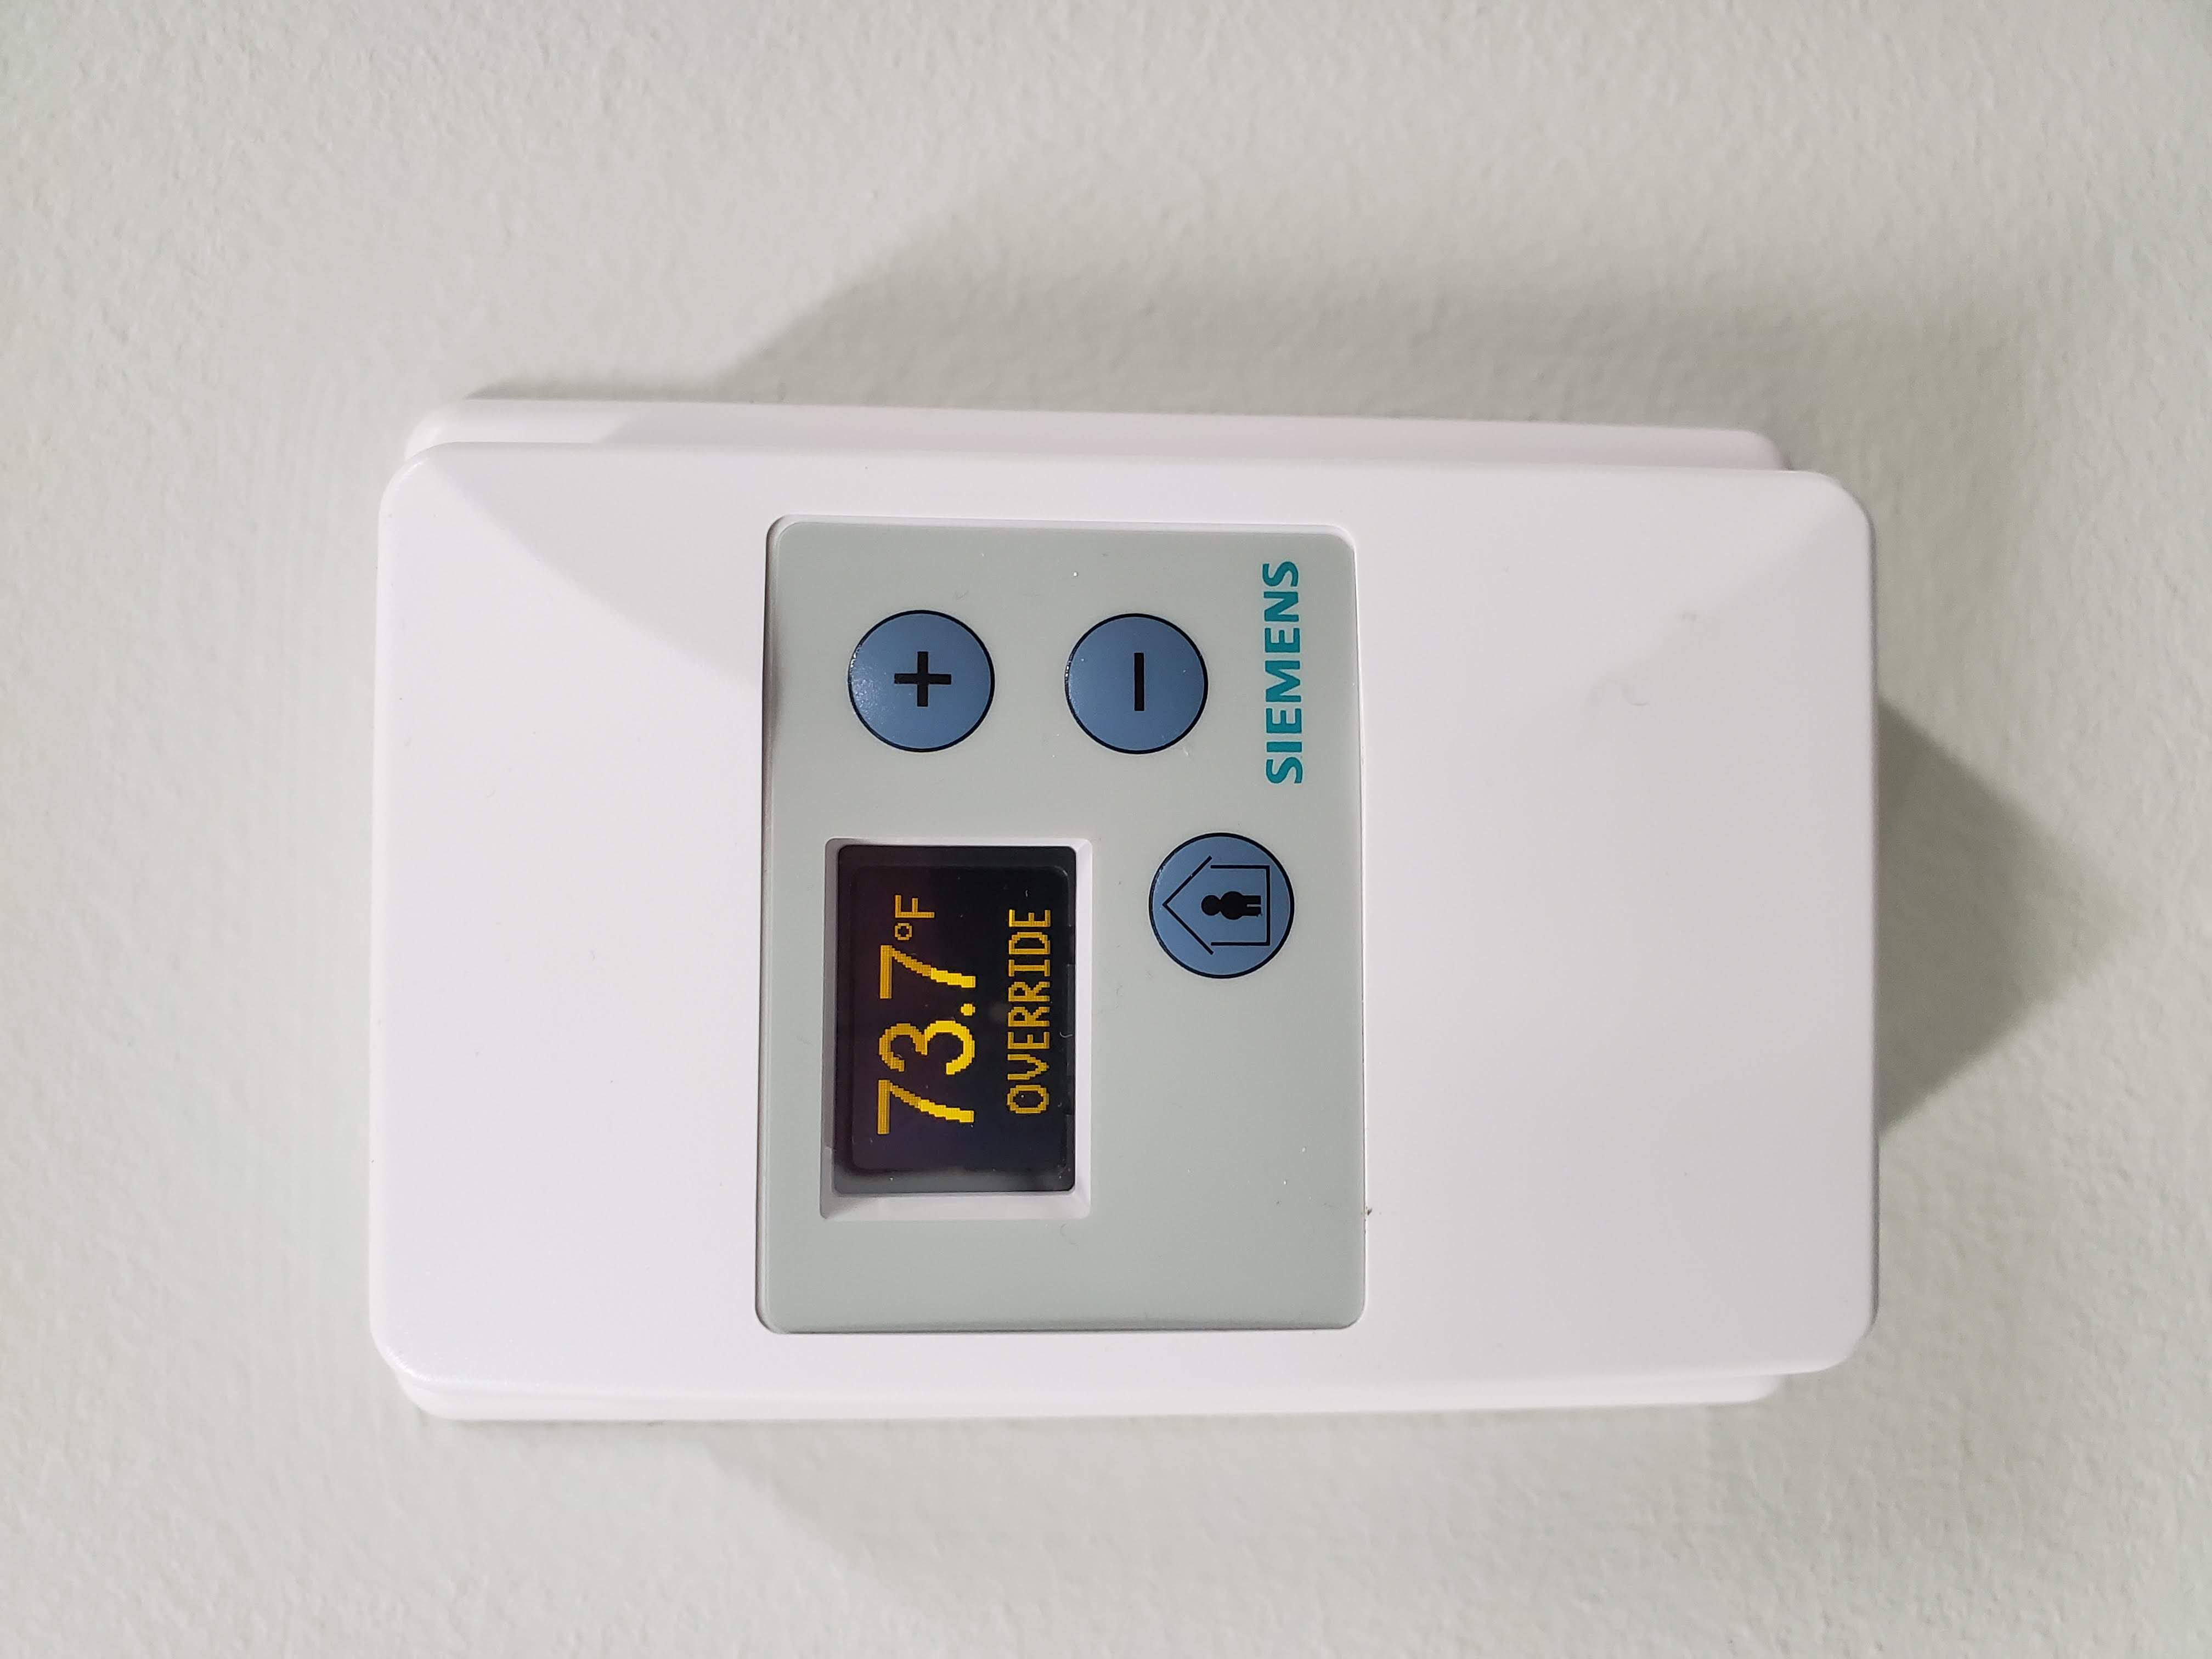 siemens thermostat with a digital display screen